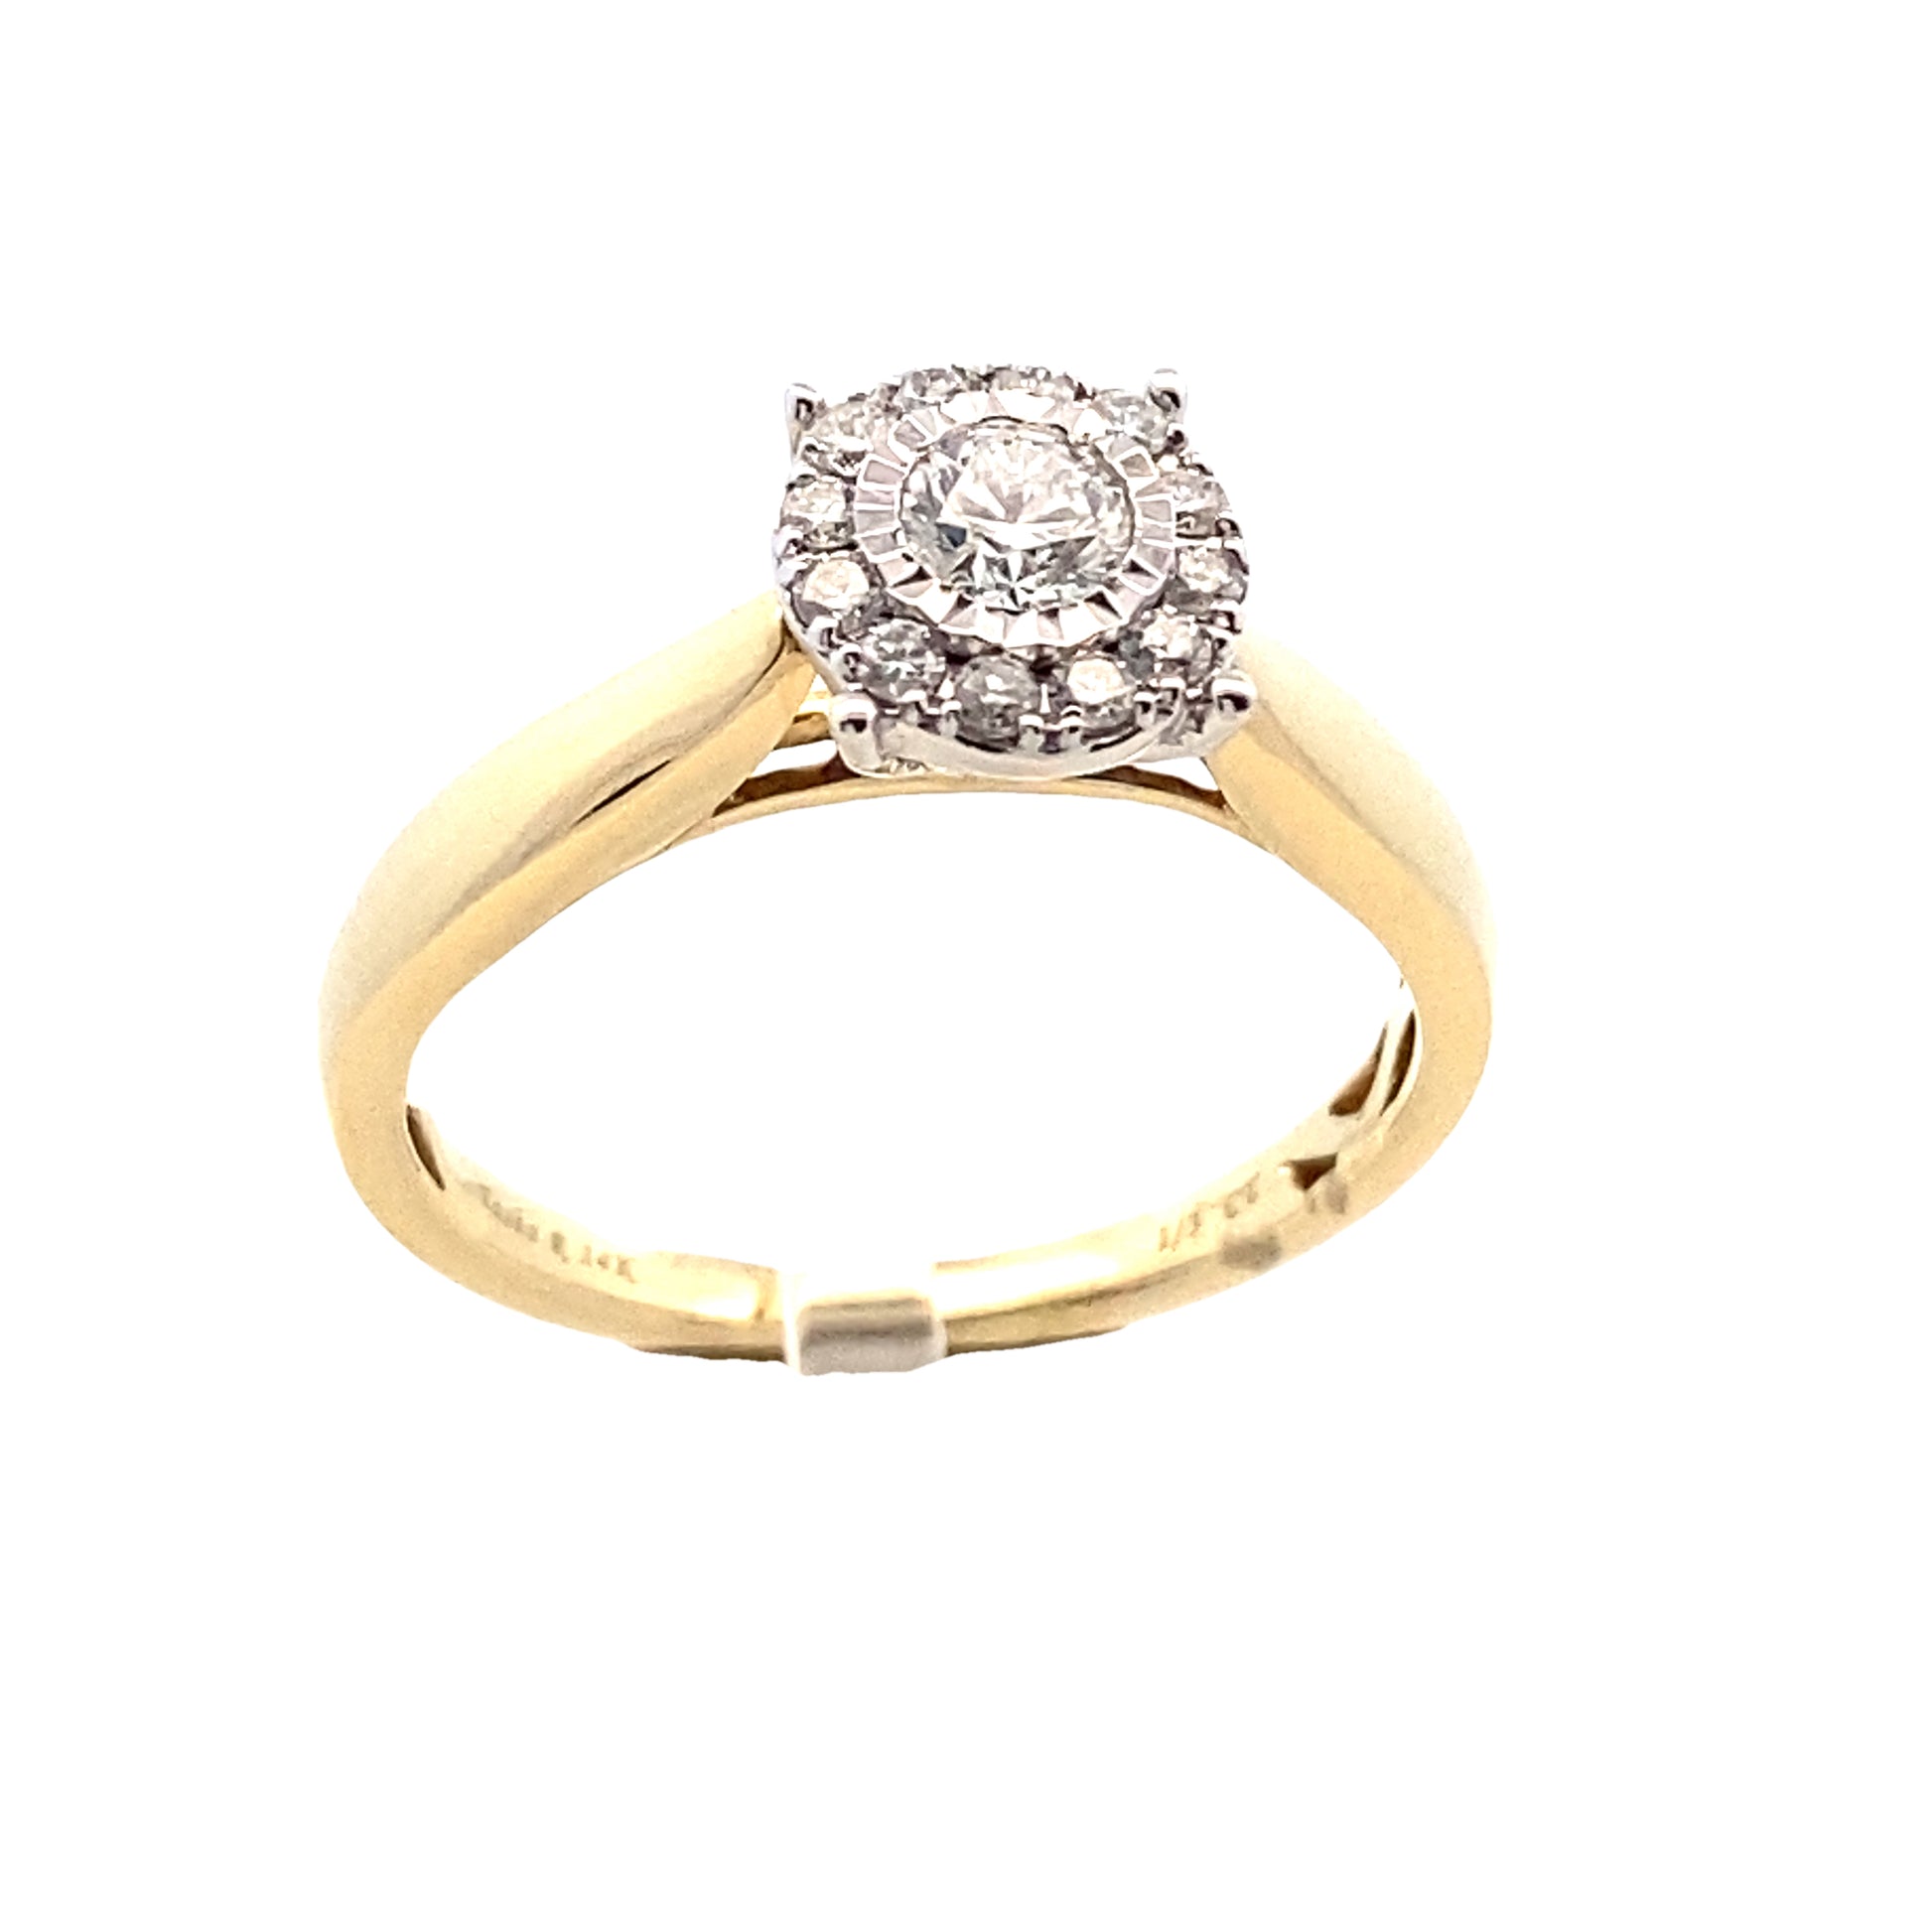 14K Gold Diamond Bridal Ring 0.33ct | Luby Diamond Collection | Luby 